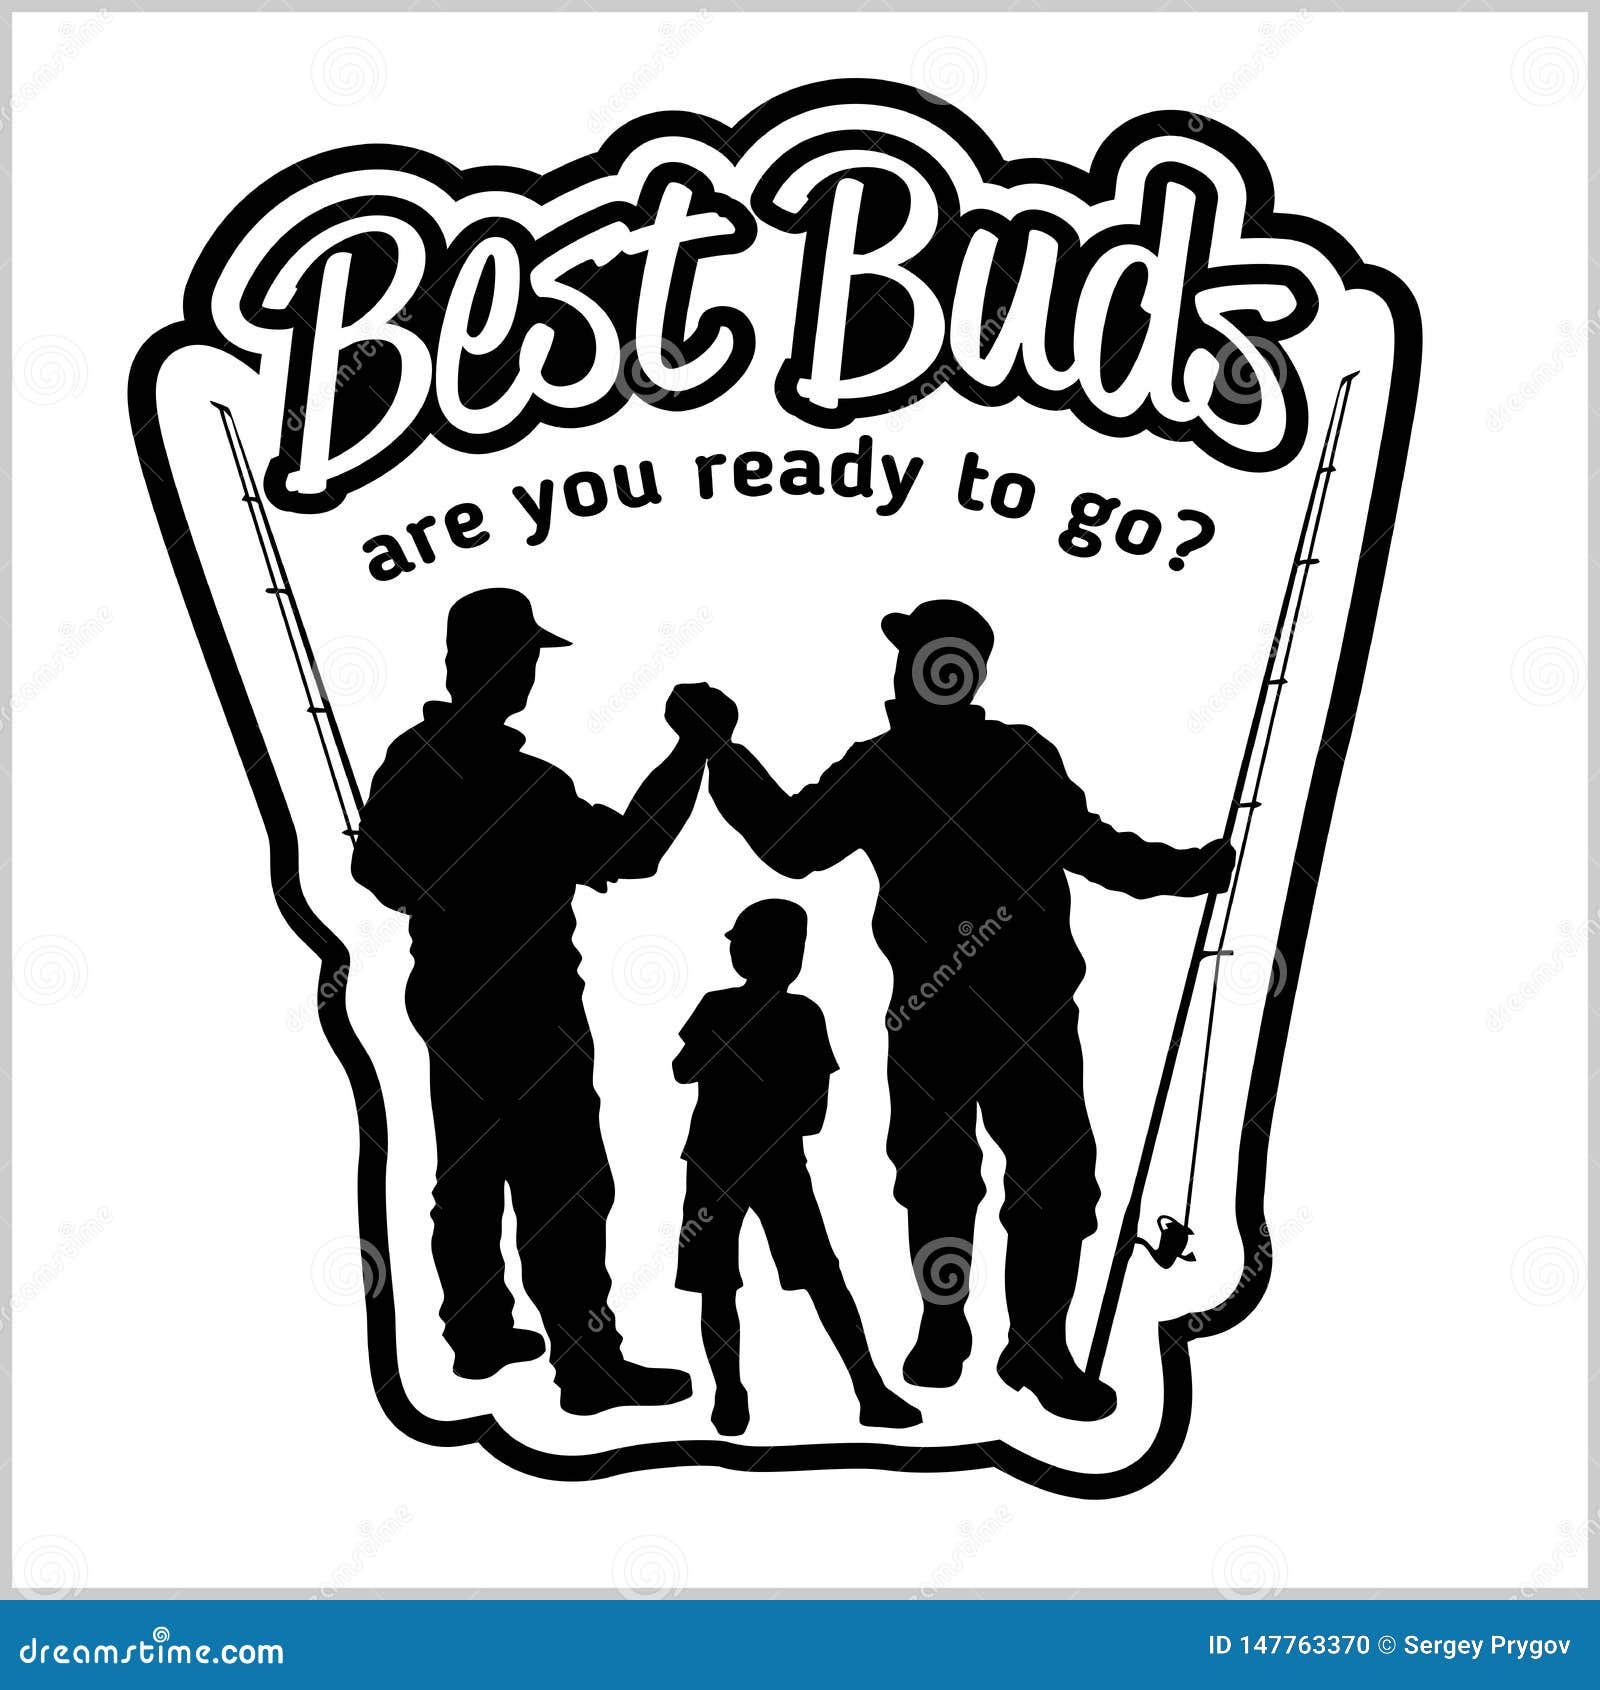 Fishermans and Rods - Best Buds, Silhouette Vector Stock Vector ...